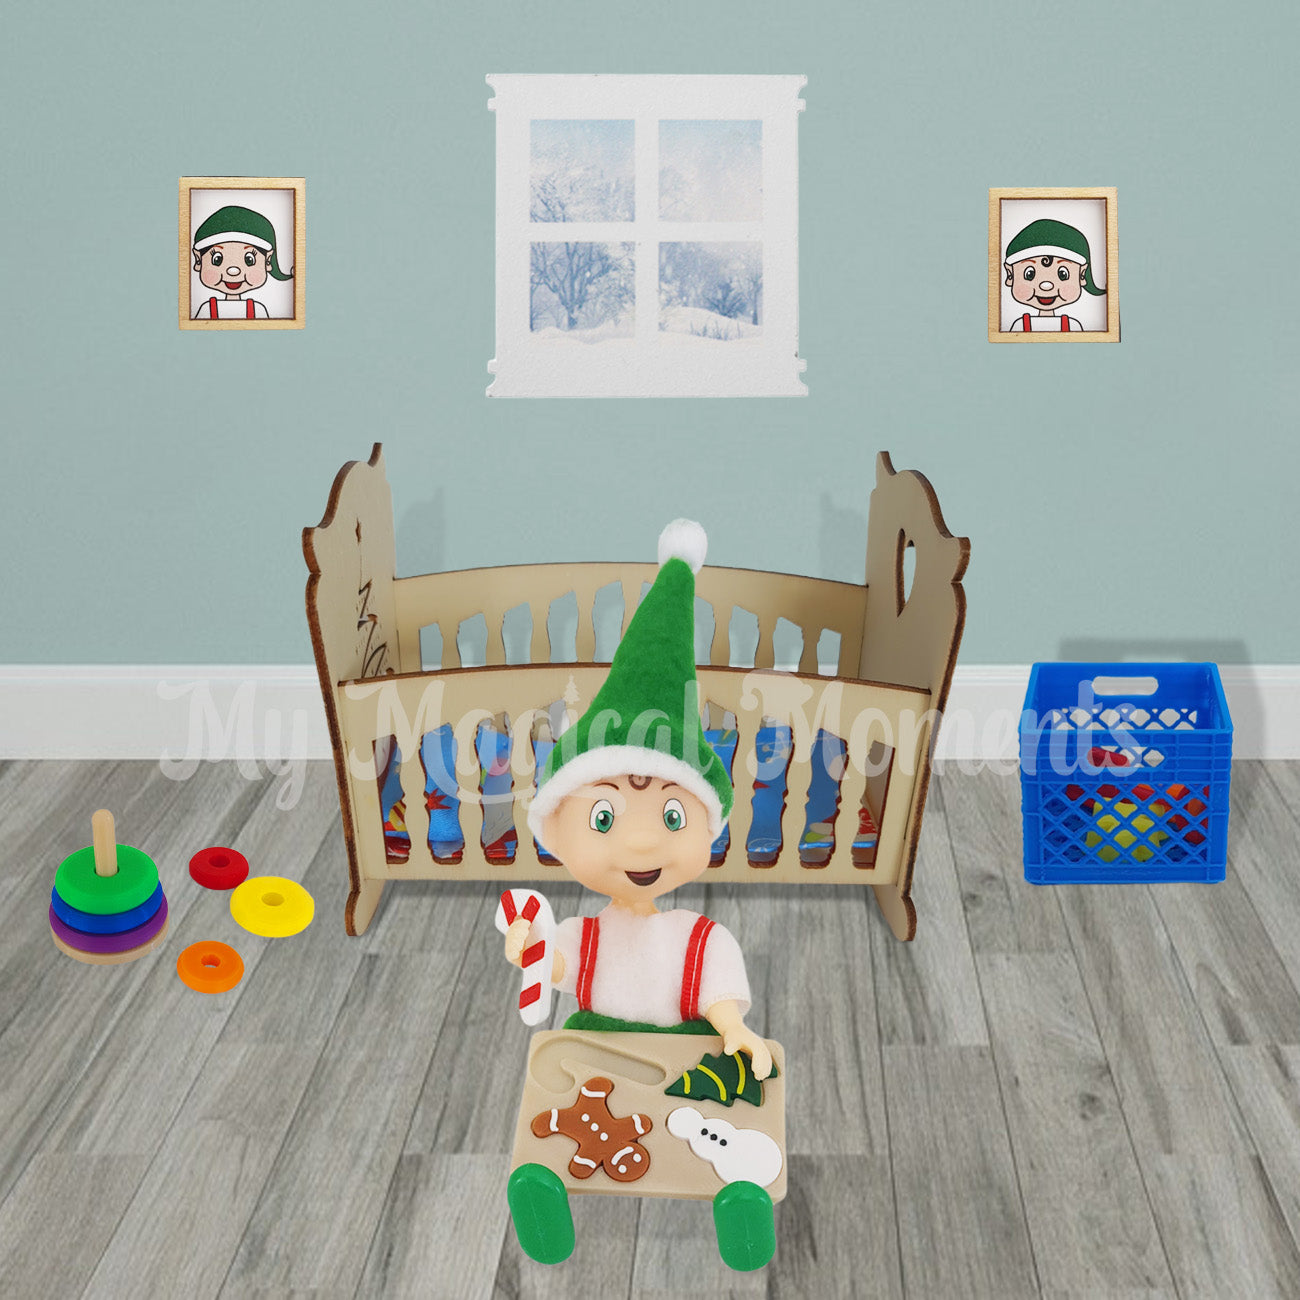 Elf toddler sitting in playroom with a puzzle, ring stacker toy and baby cot